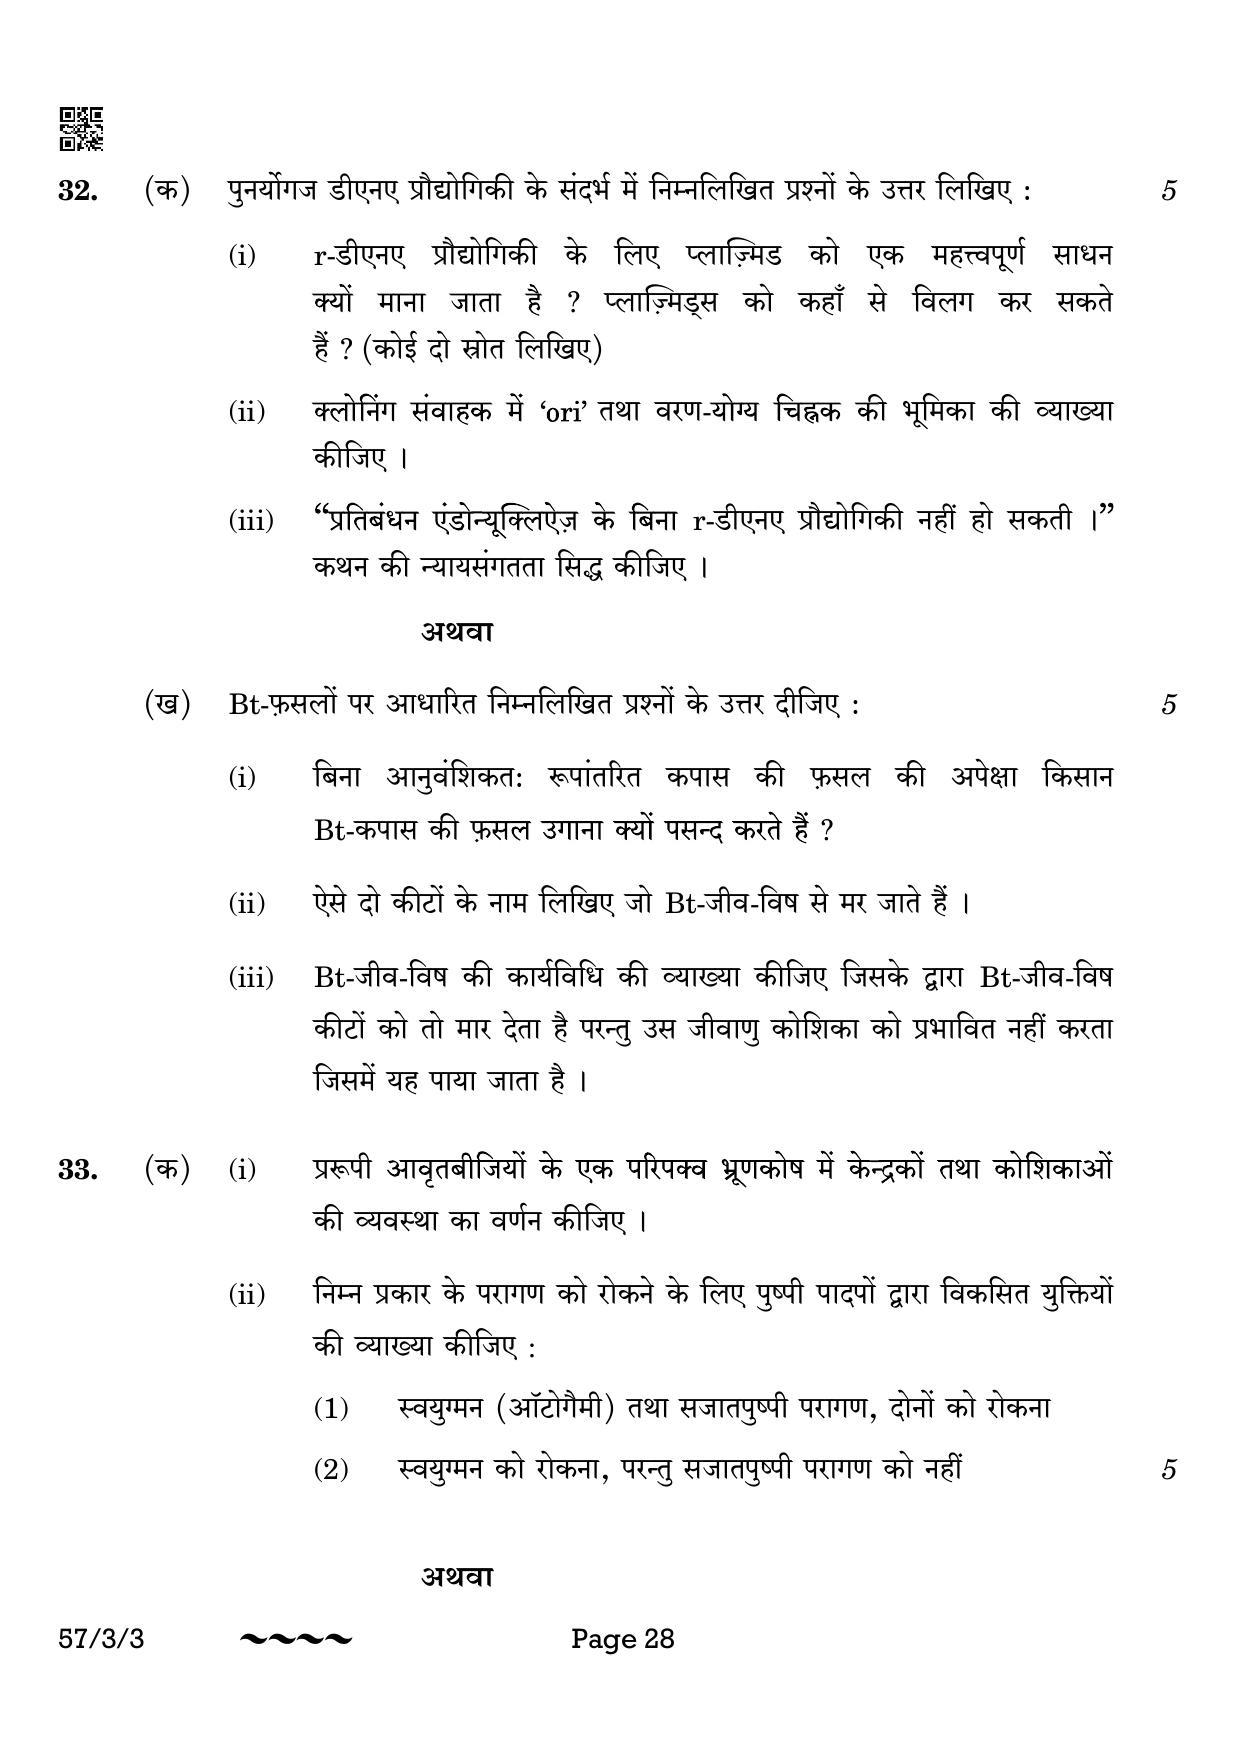 CBSE Class 12 57-3-3 Biology 2023 Question Paper - Page 28